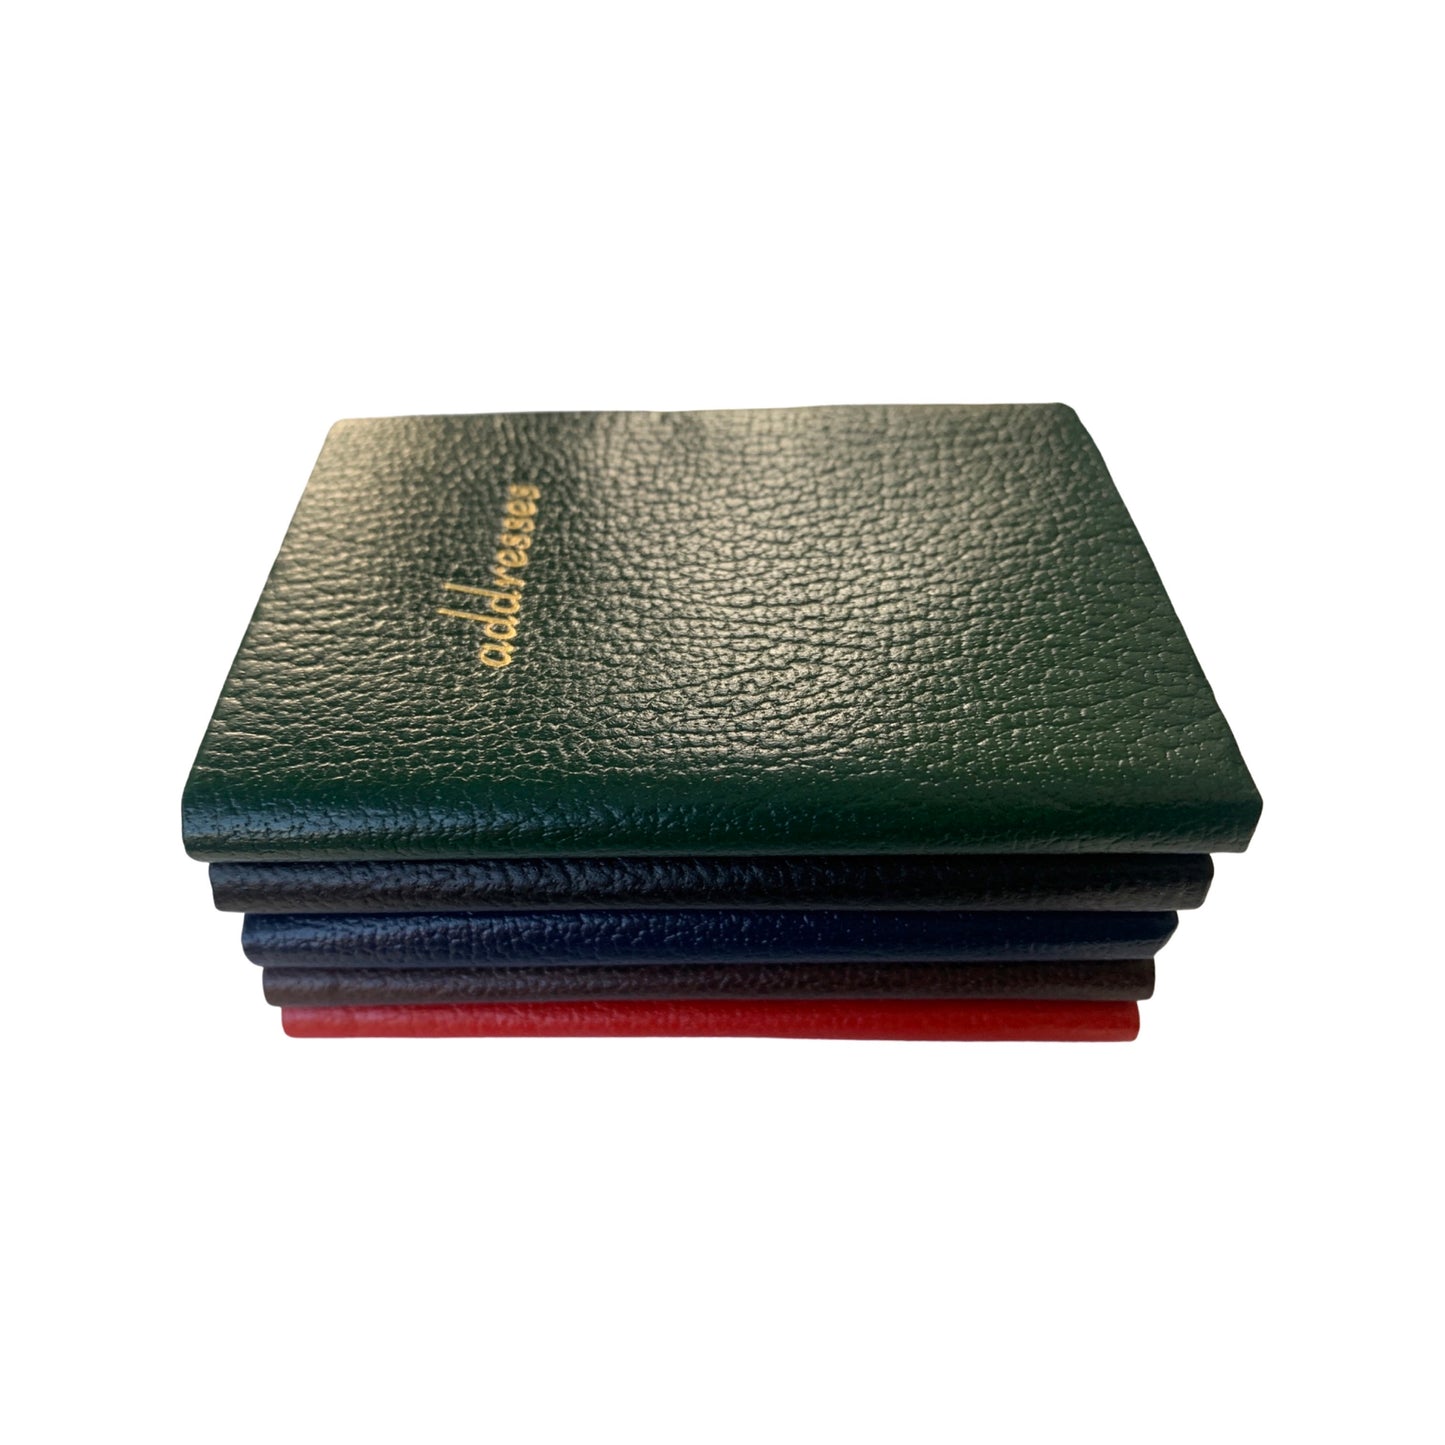 Address Book |  3 by 2.5 inch size | Sealgrain Leather | Charing Cross | A32S